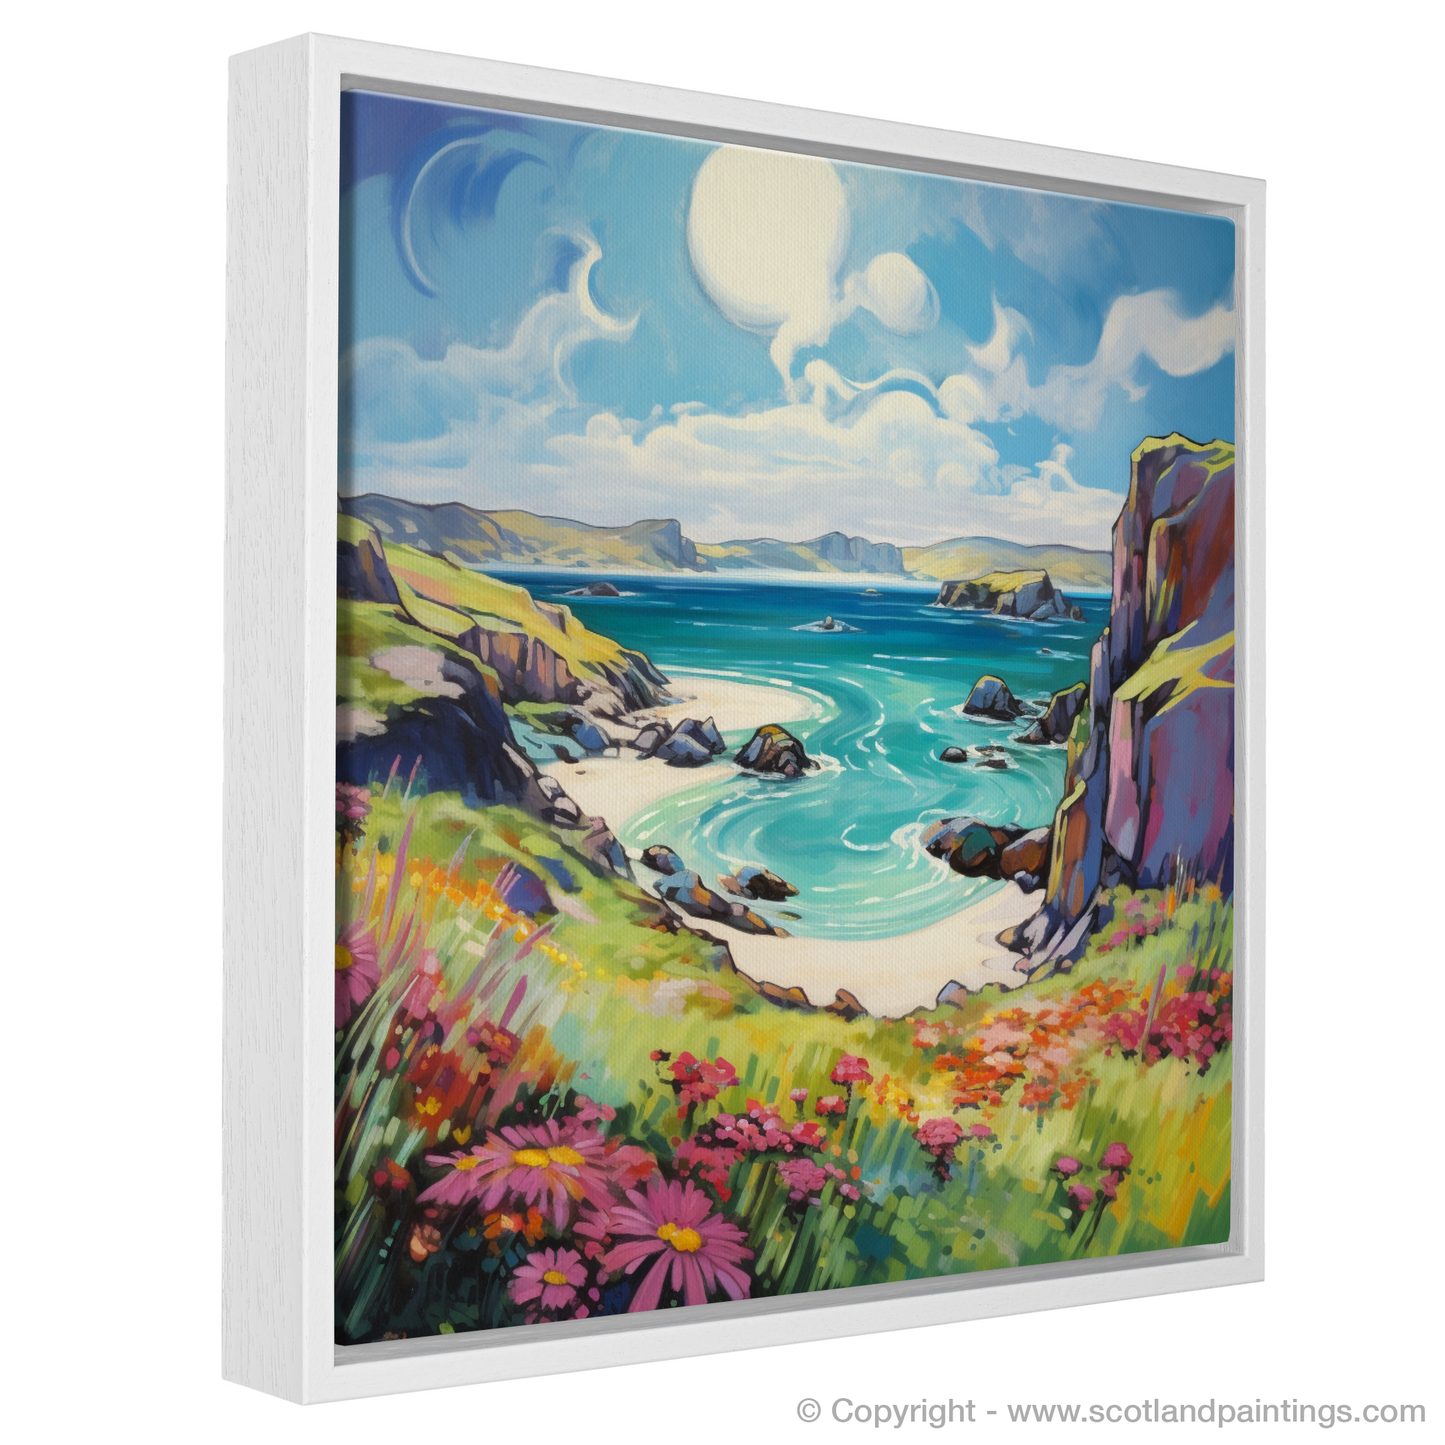 Painting and Art Print of Isle of Lewis, Outer Hebrides in summer entitled "Summer Splendour in Isle of Lewis".